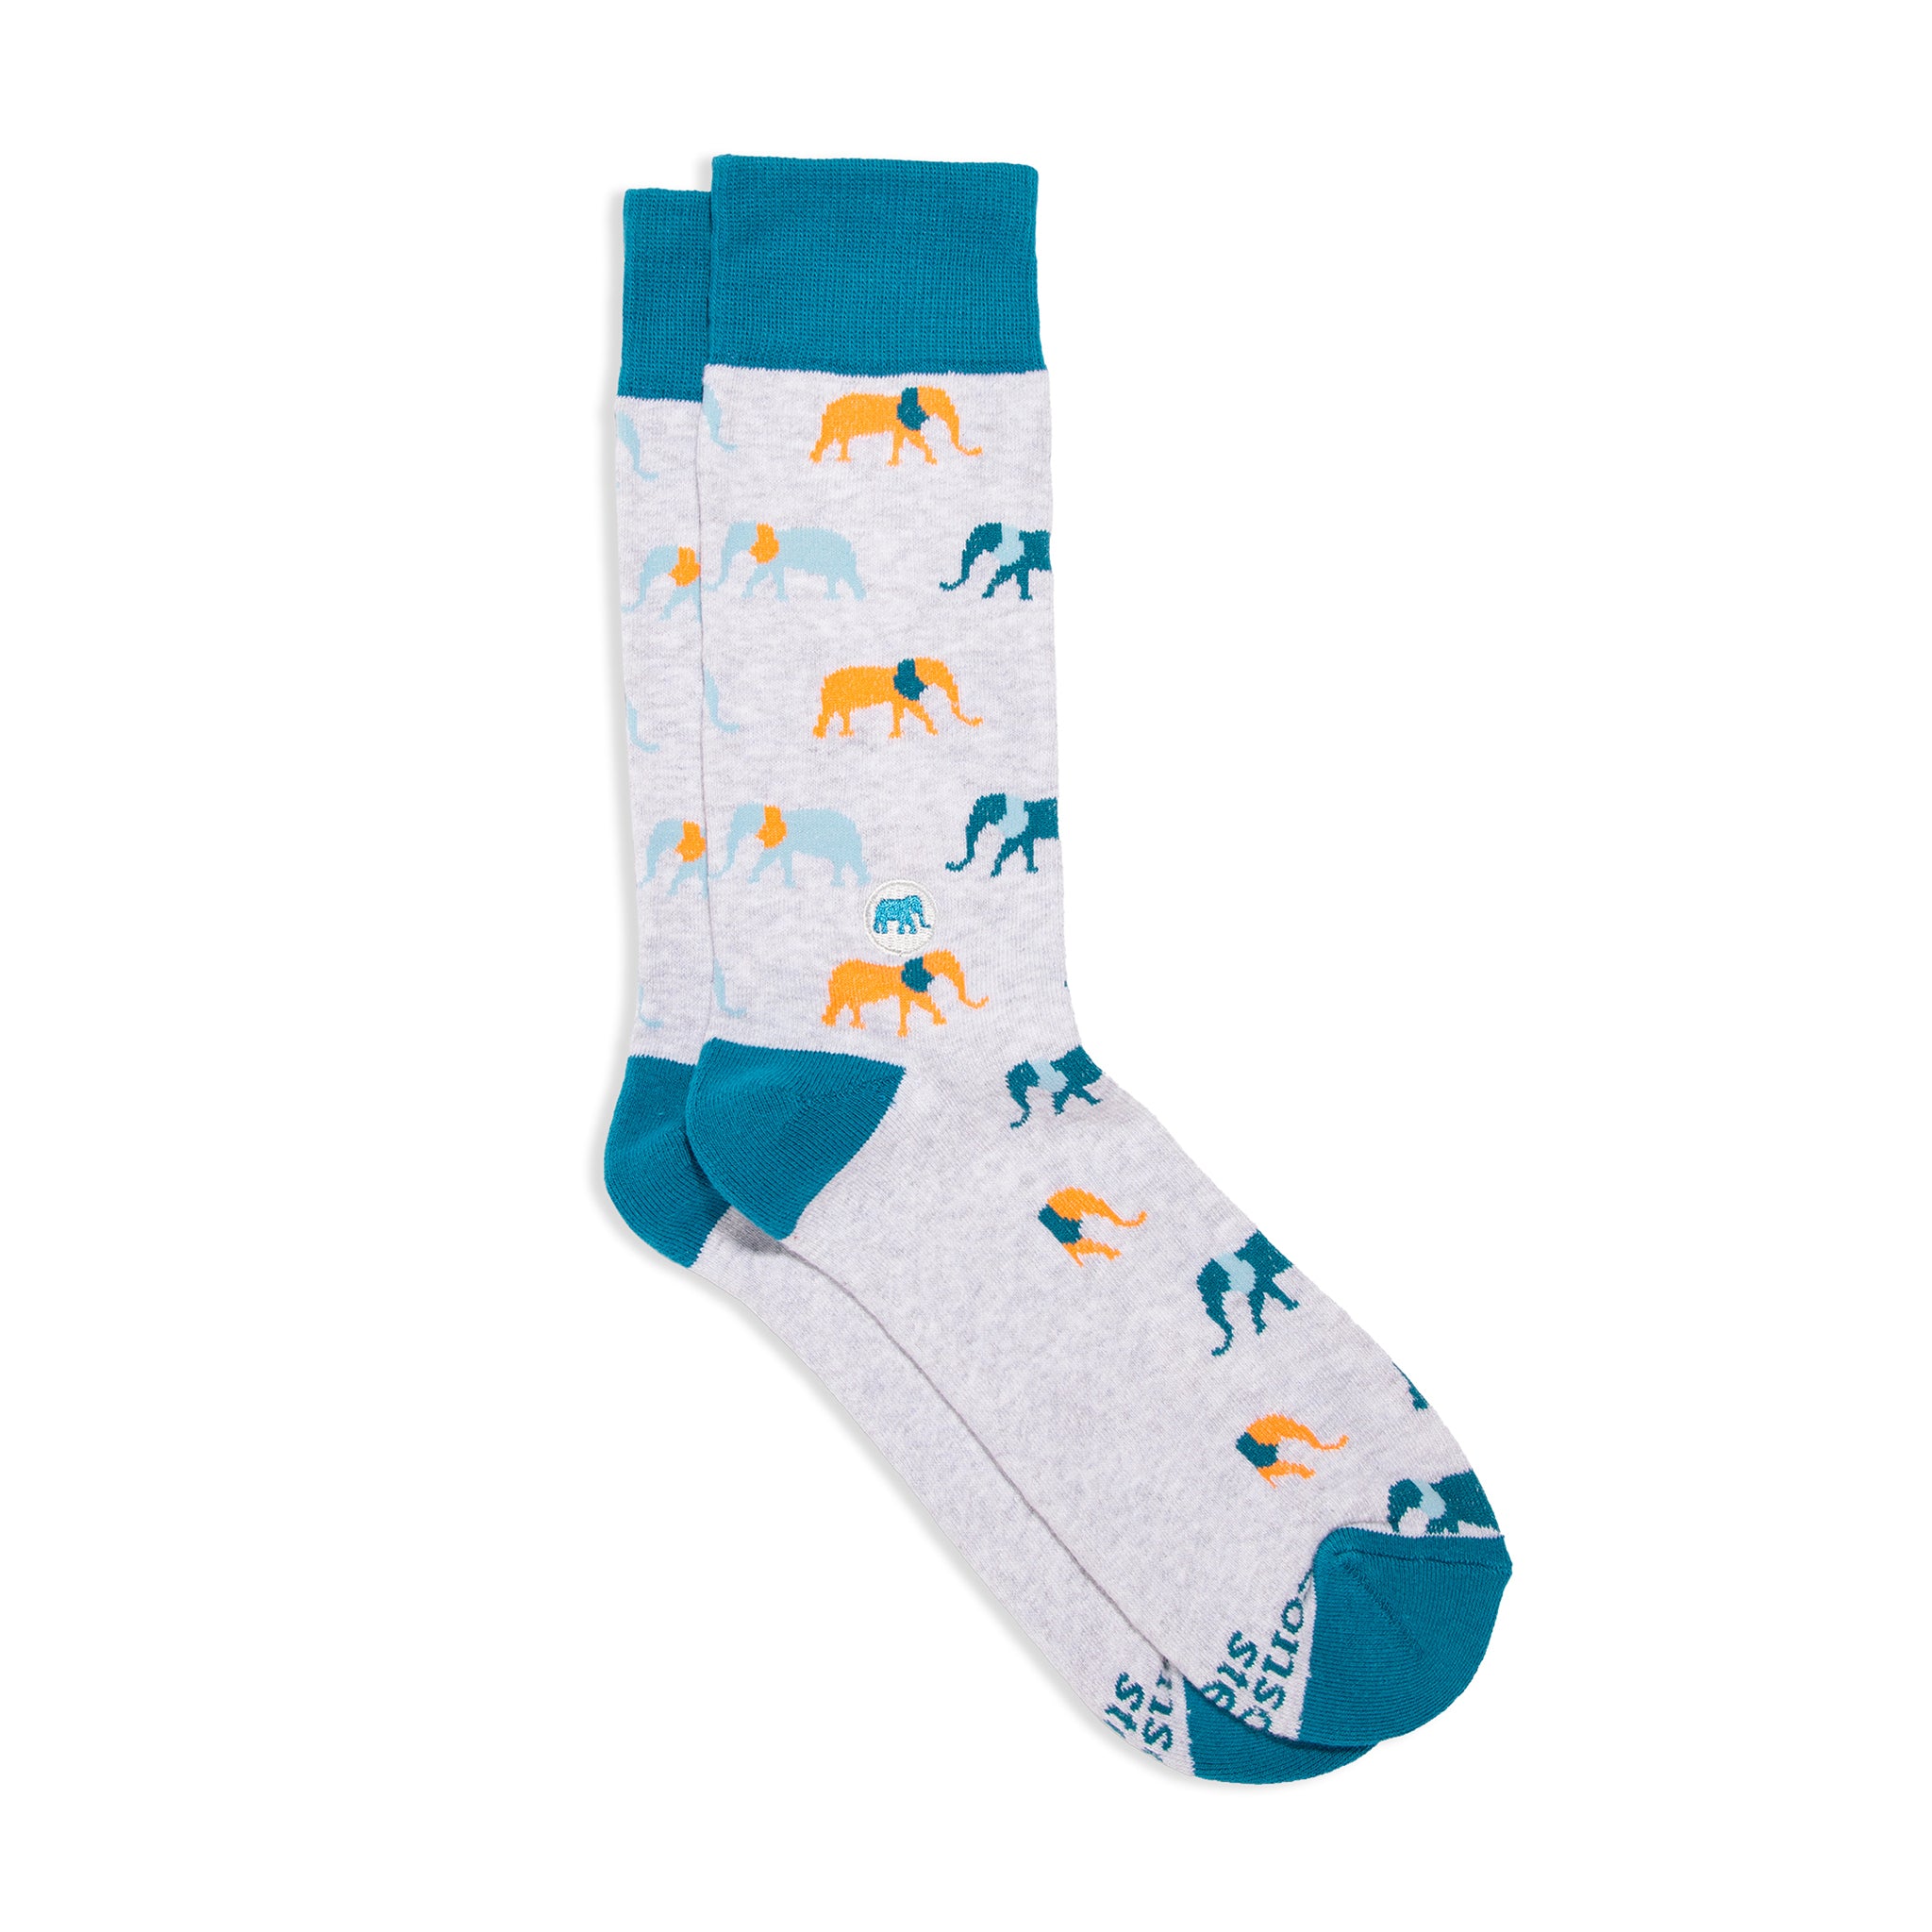 Socks that Protect Endangered Animals | Every Pair Gives Back ...